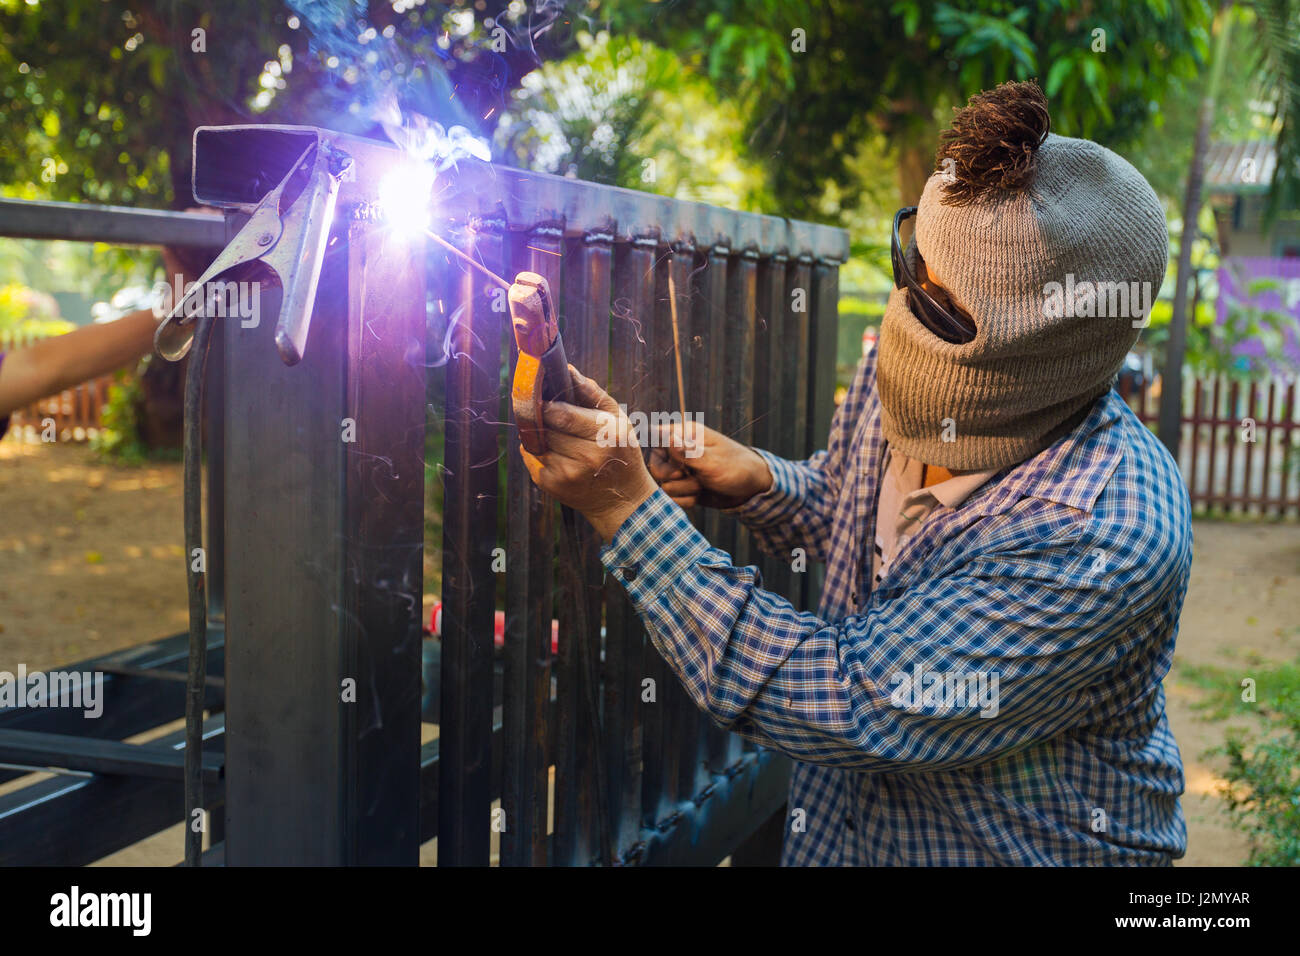 Unidentified hooded man welding steel platform, bright light and sparks, outdoor with blurr background trees Stock Photo